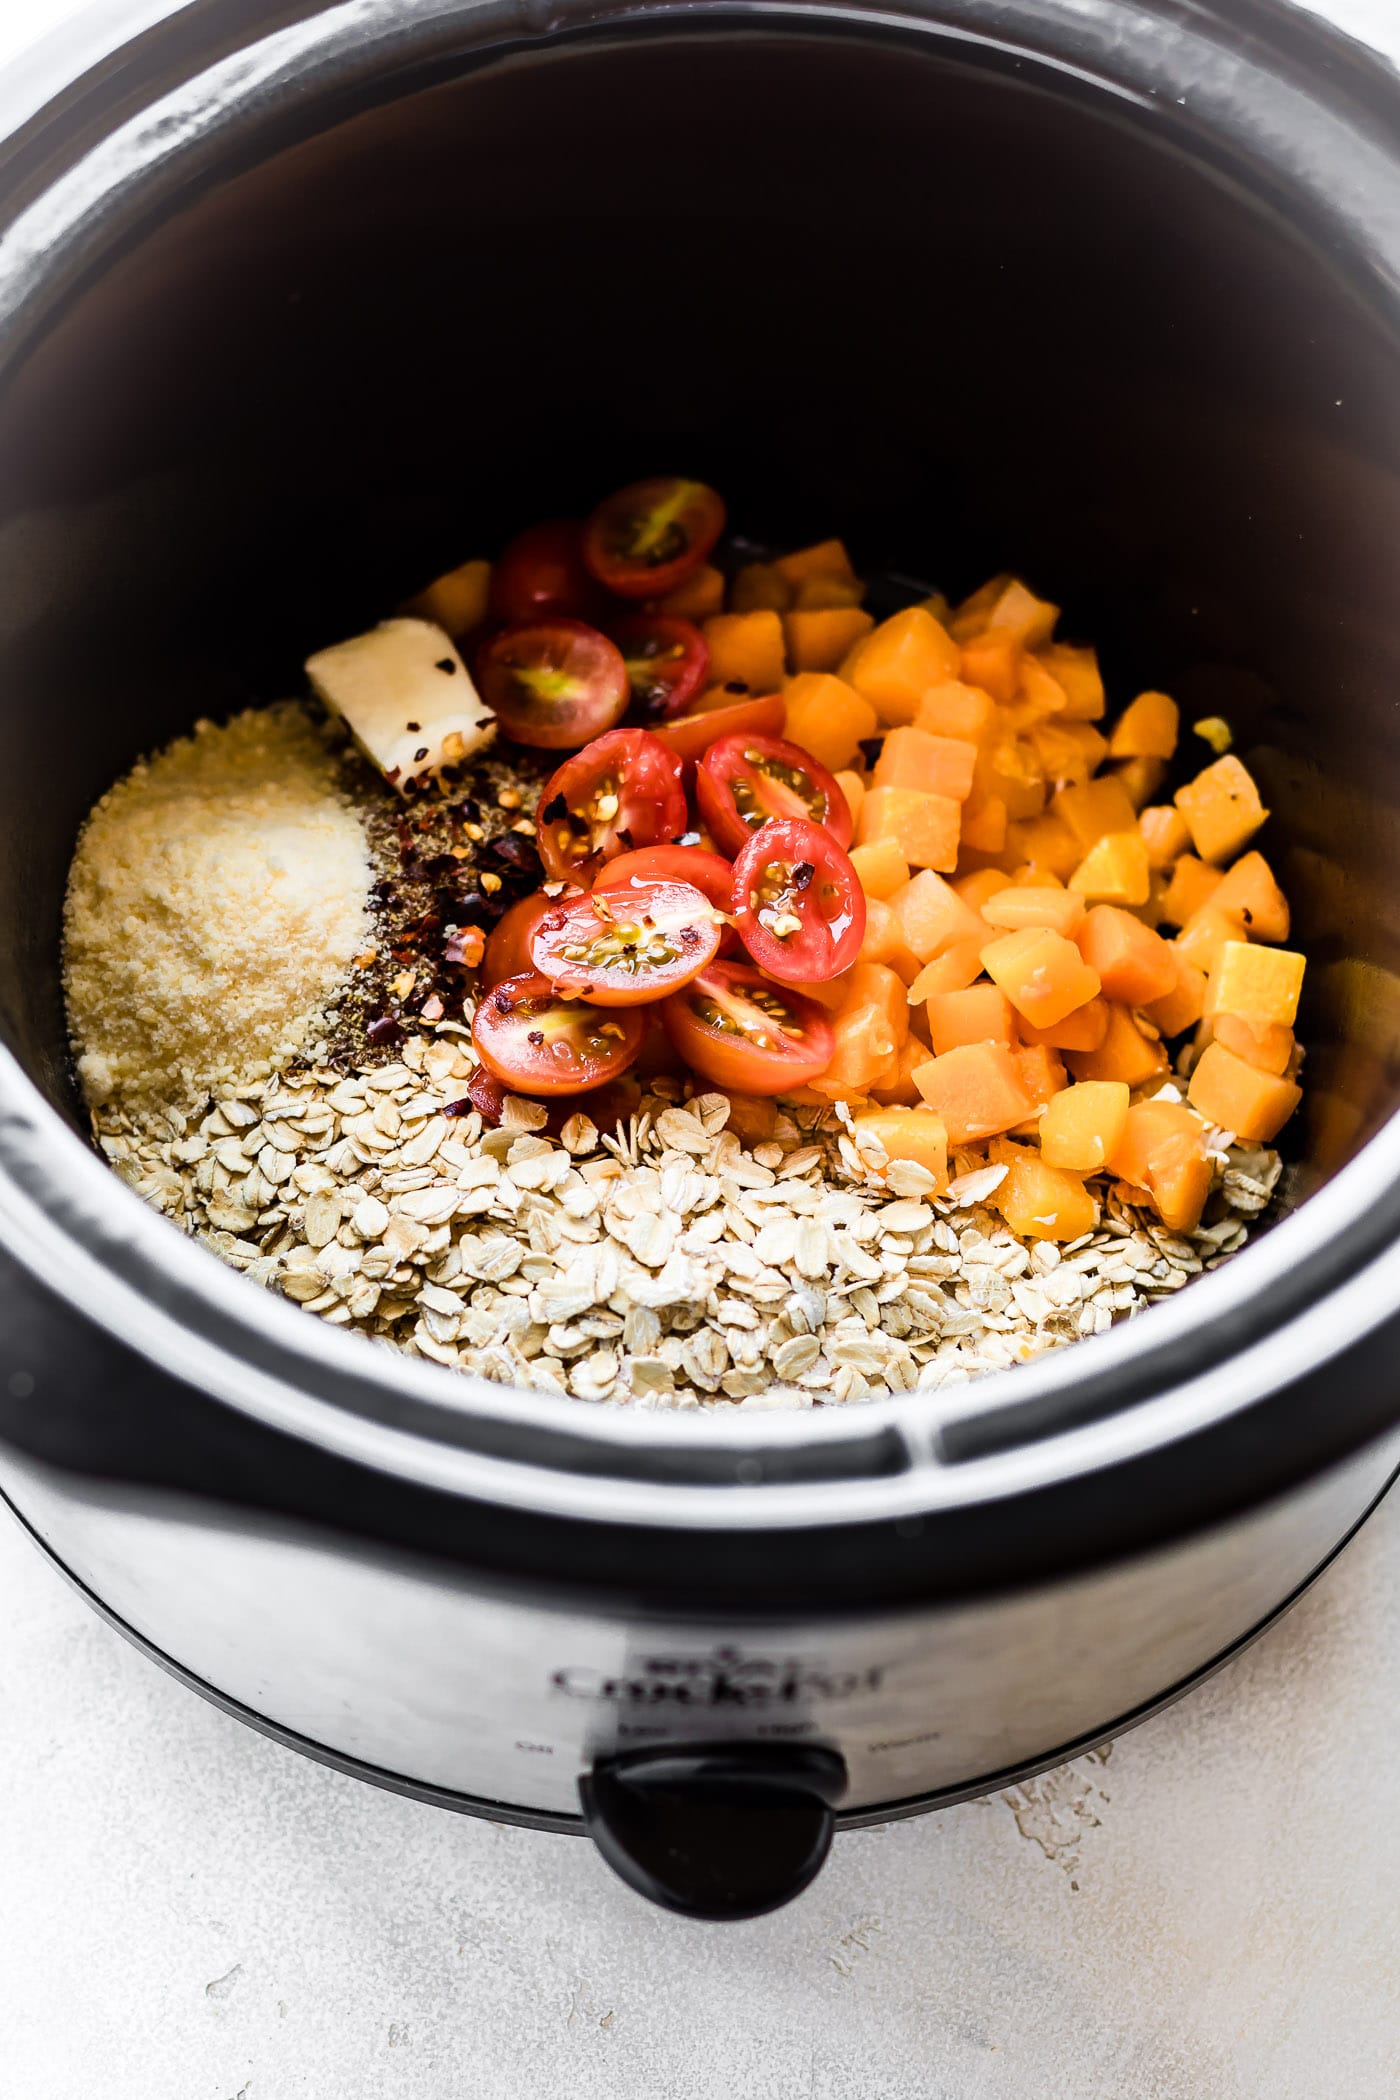 All ingredients for savory slow cooker oatmeal in black slow cooker